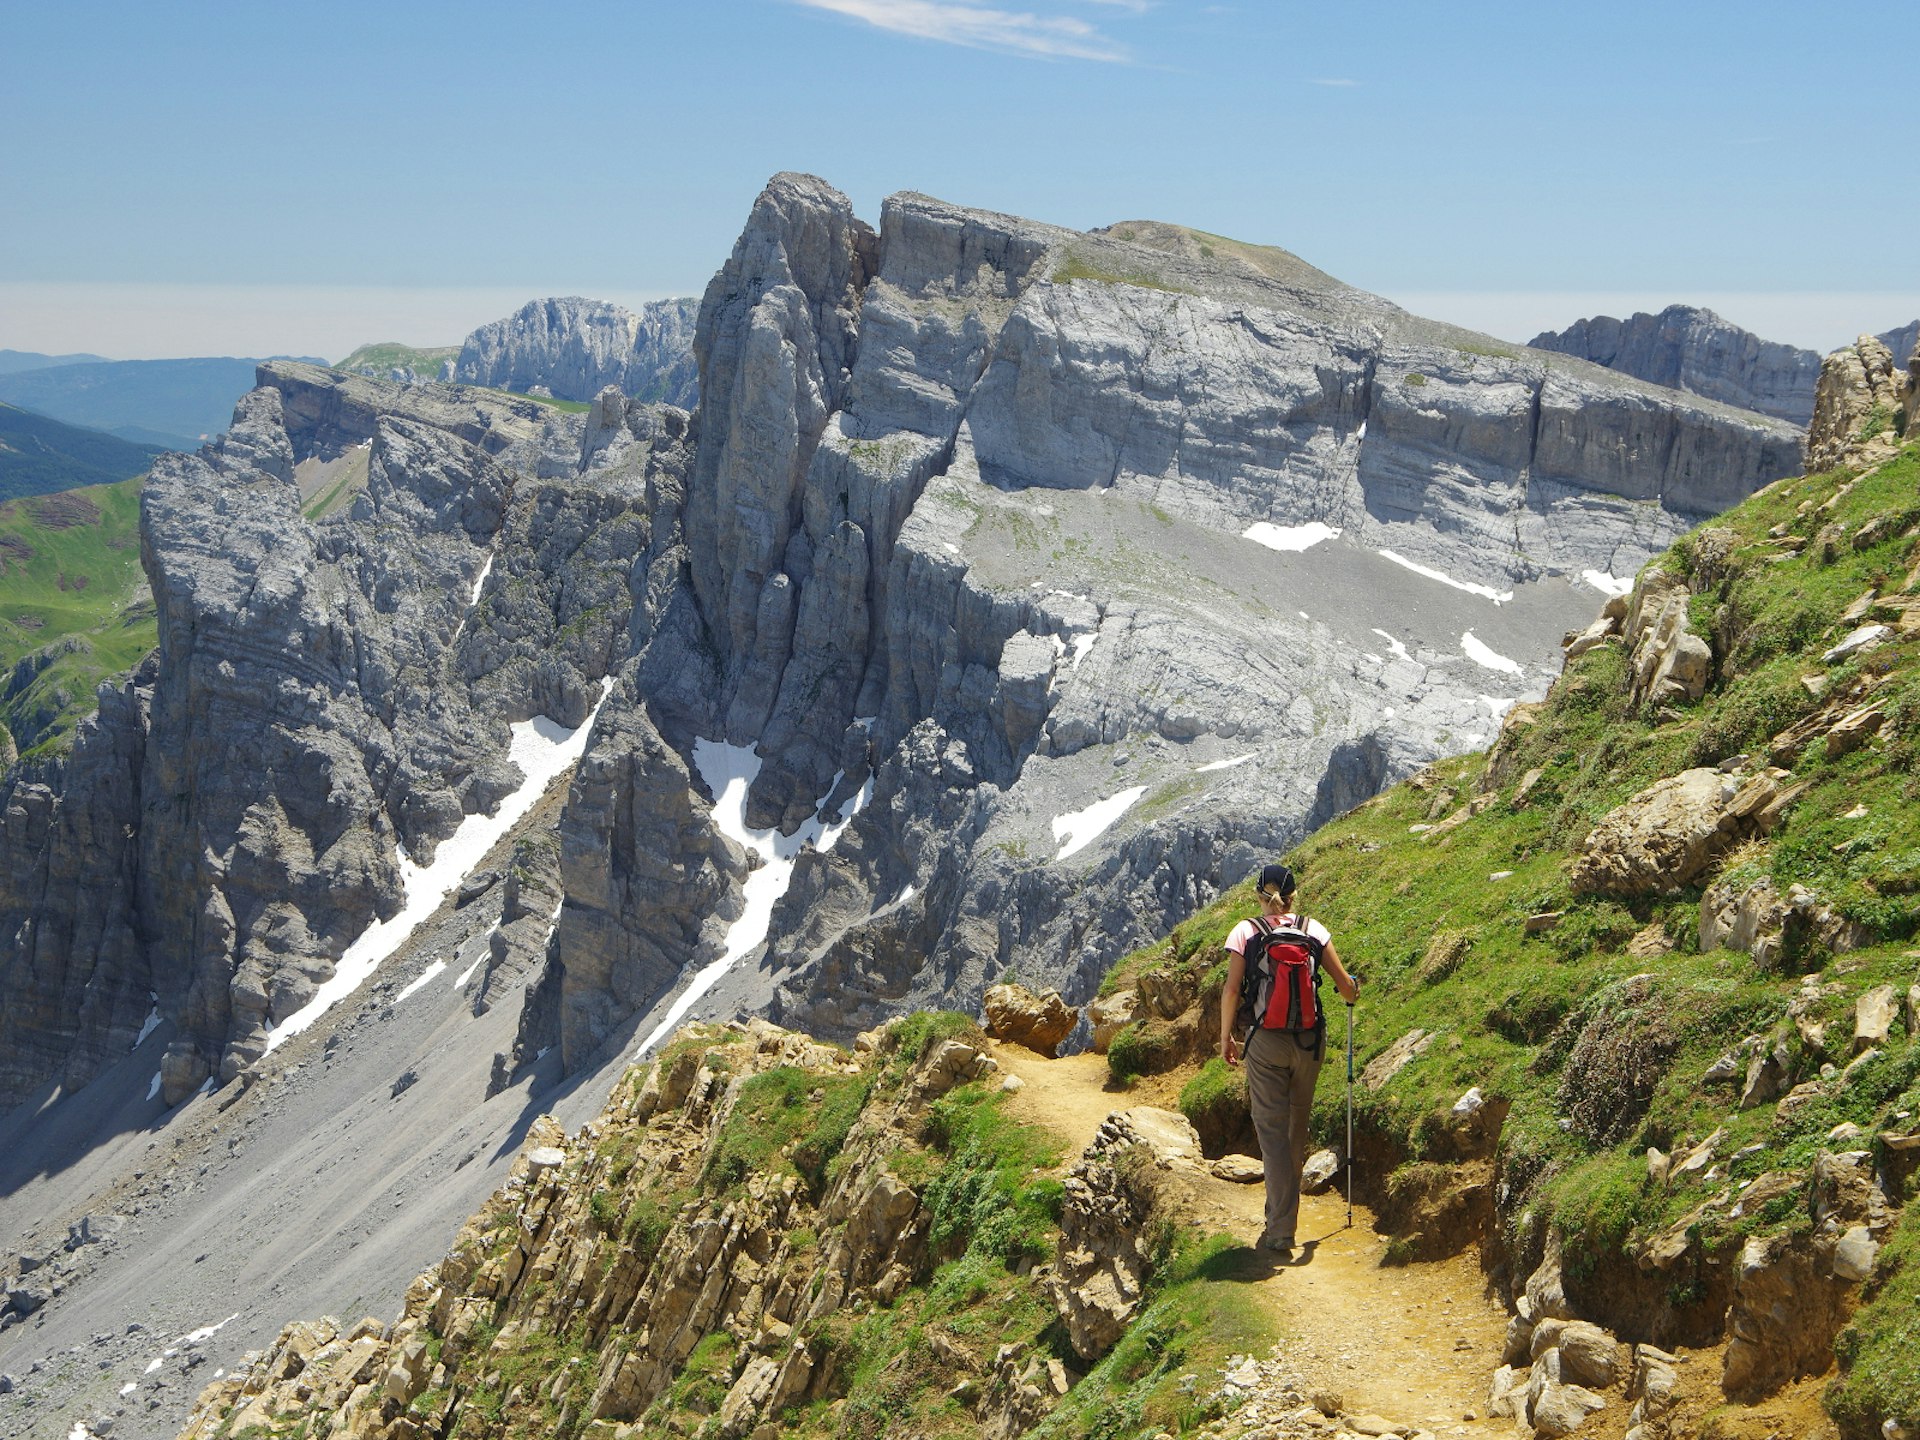 A female hiker walks a narrow mountain path with peaks ahead of her, on a sunny day in the Spanish Pyrenees